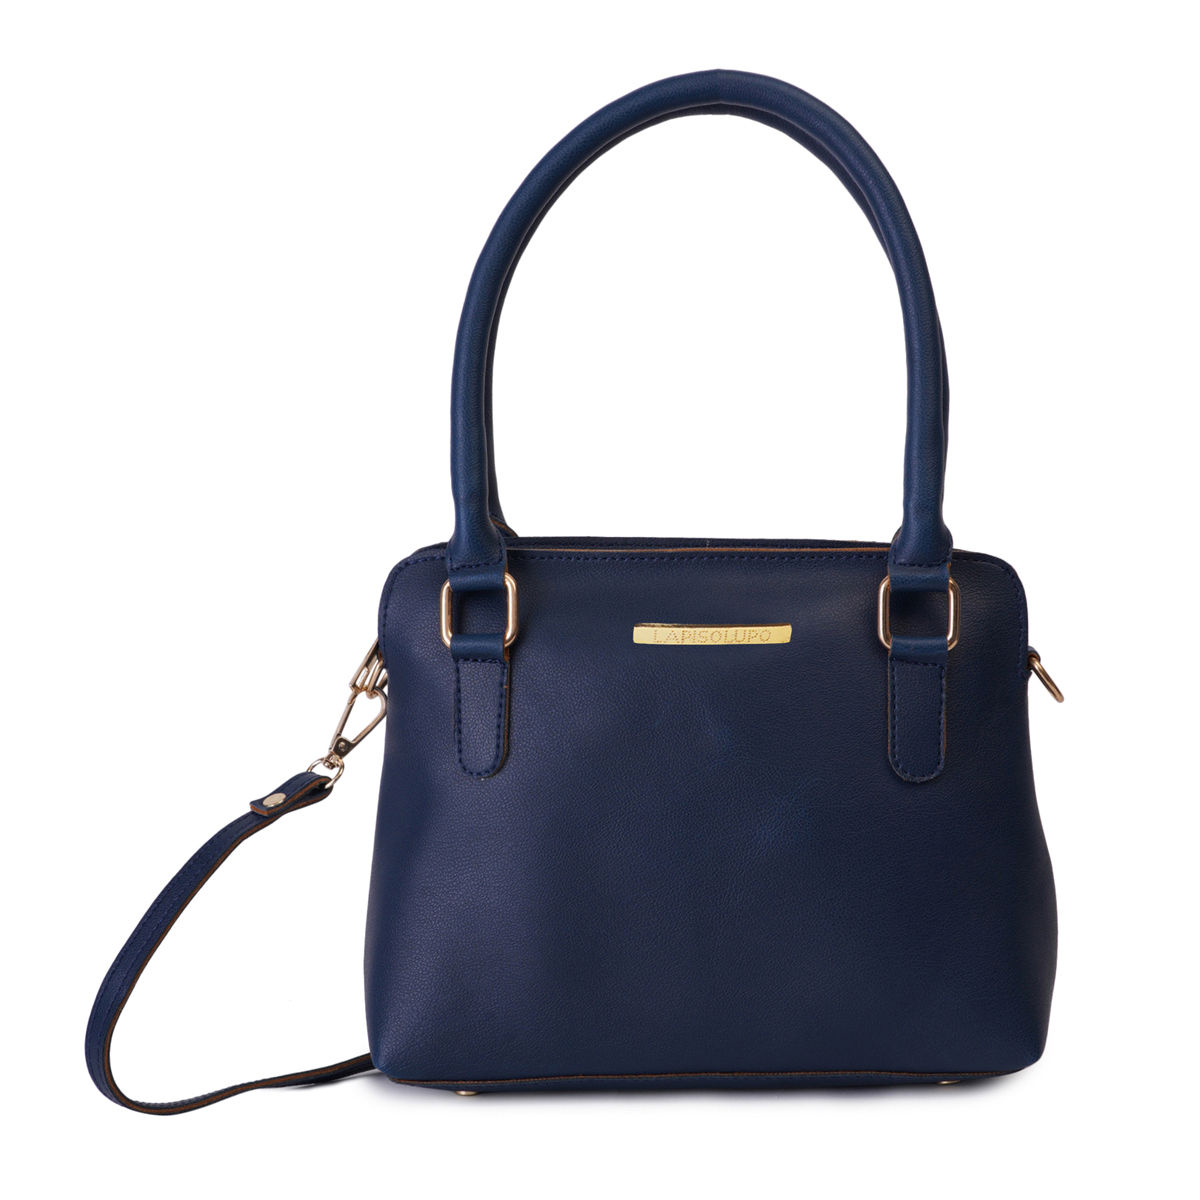 Buy Hand Bag With Mobile Pouch Online|Best Prices